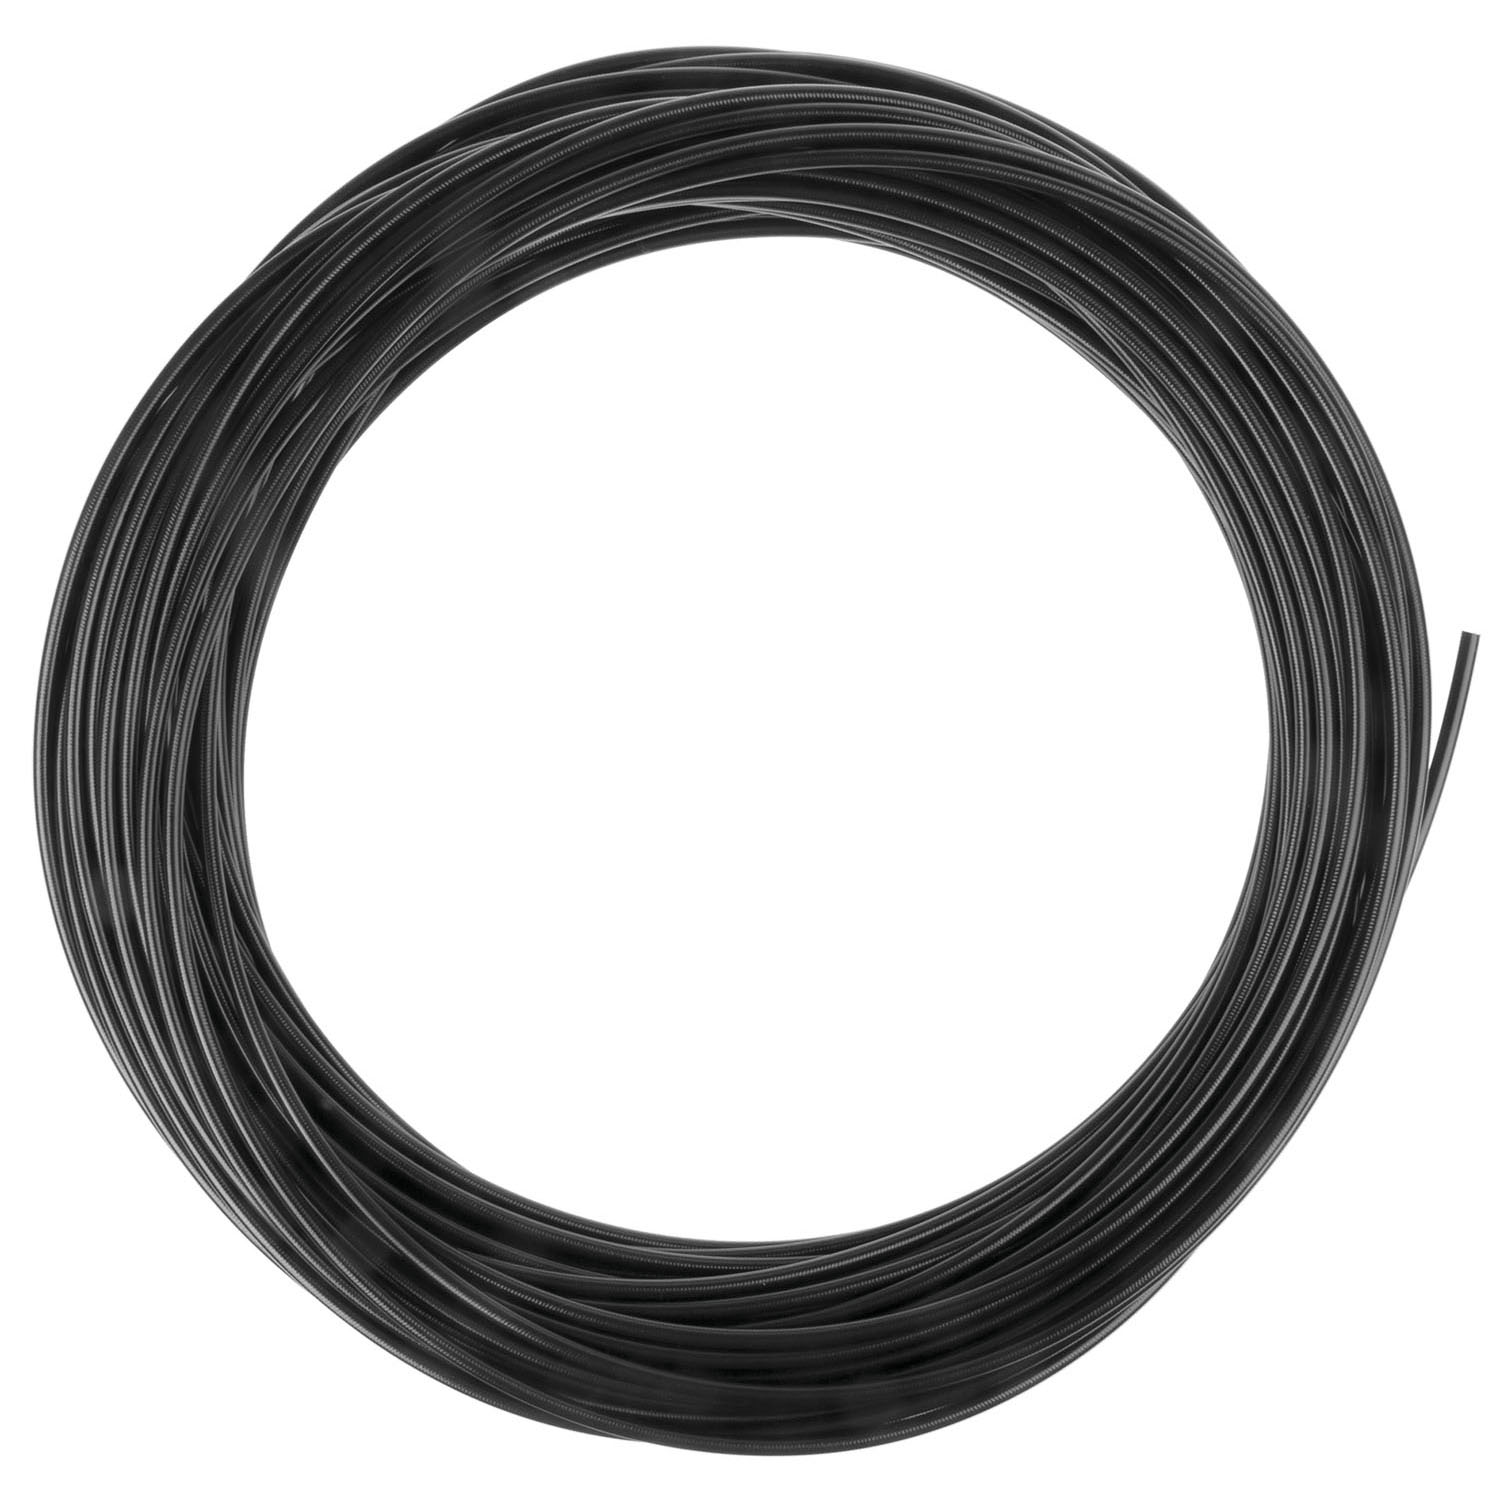 Hydraulic outer cable black 30 m inner diameter 2.5 mm, outer diameter 5,5 mm